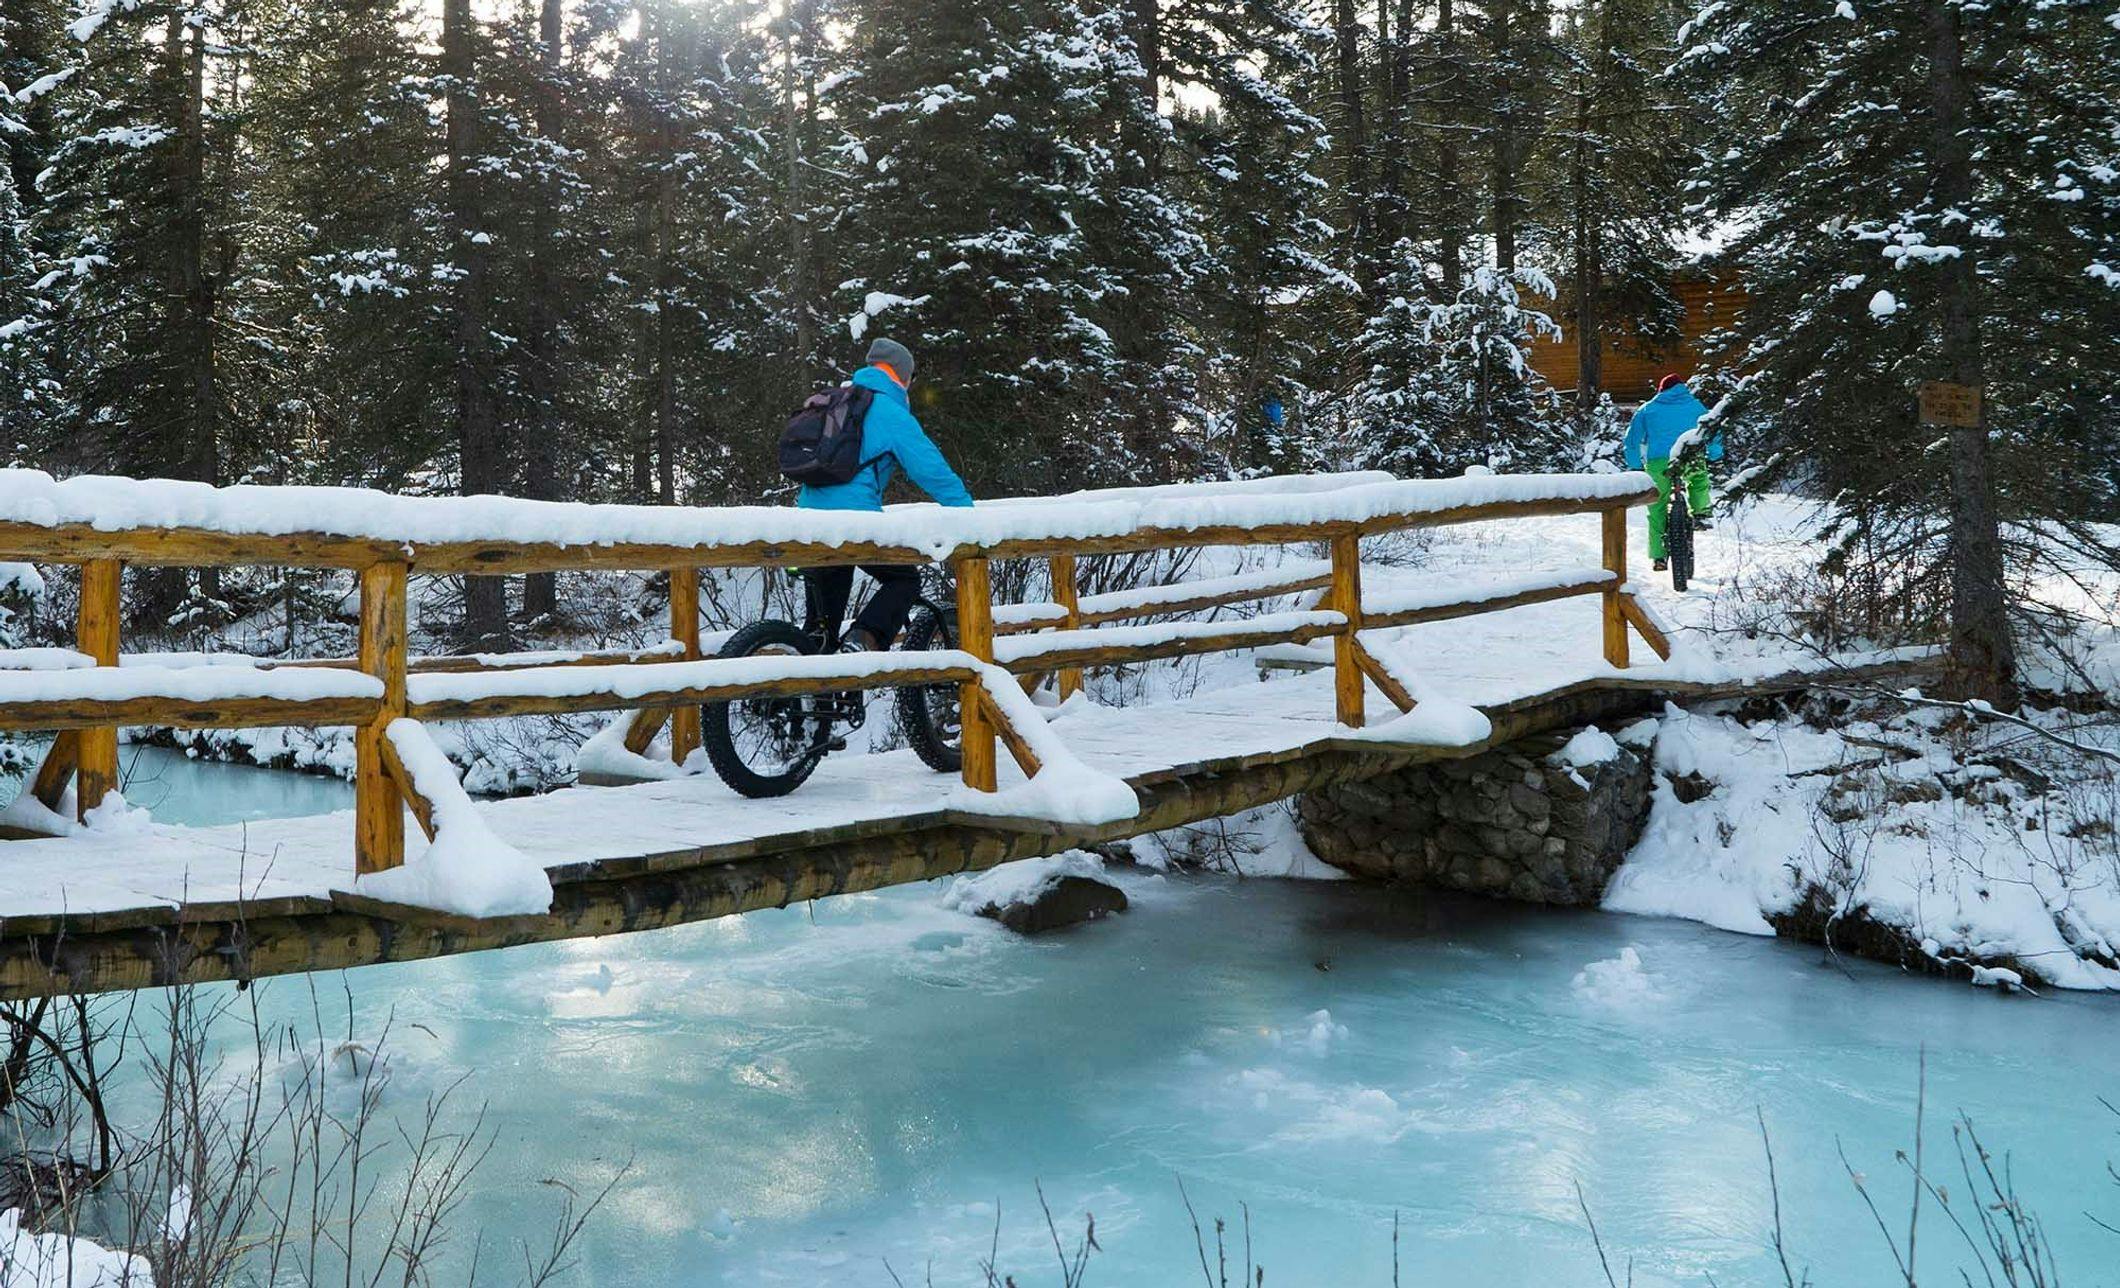 Two cyclists riding fat bikes across a snow covered bridge and over a frozen river